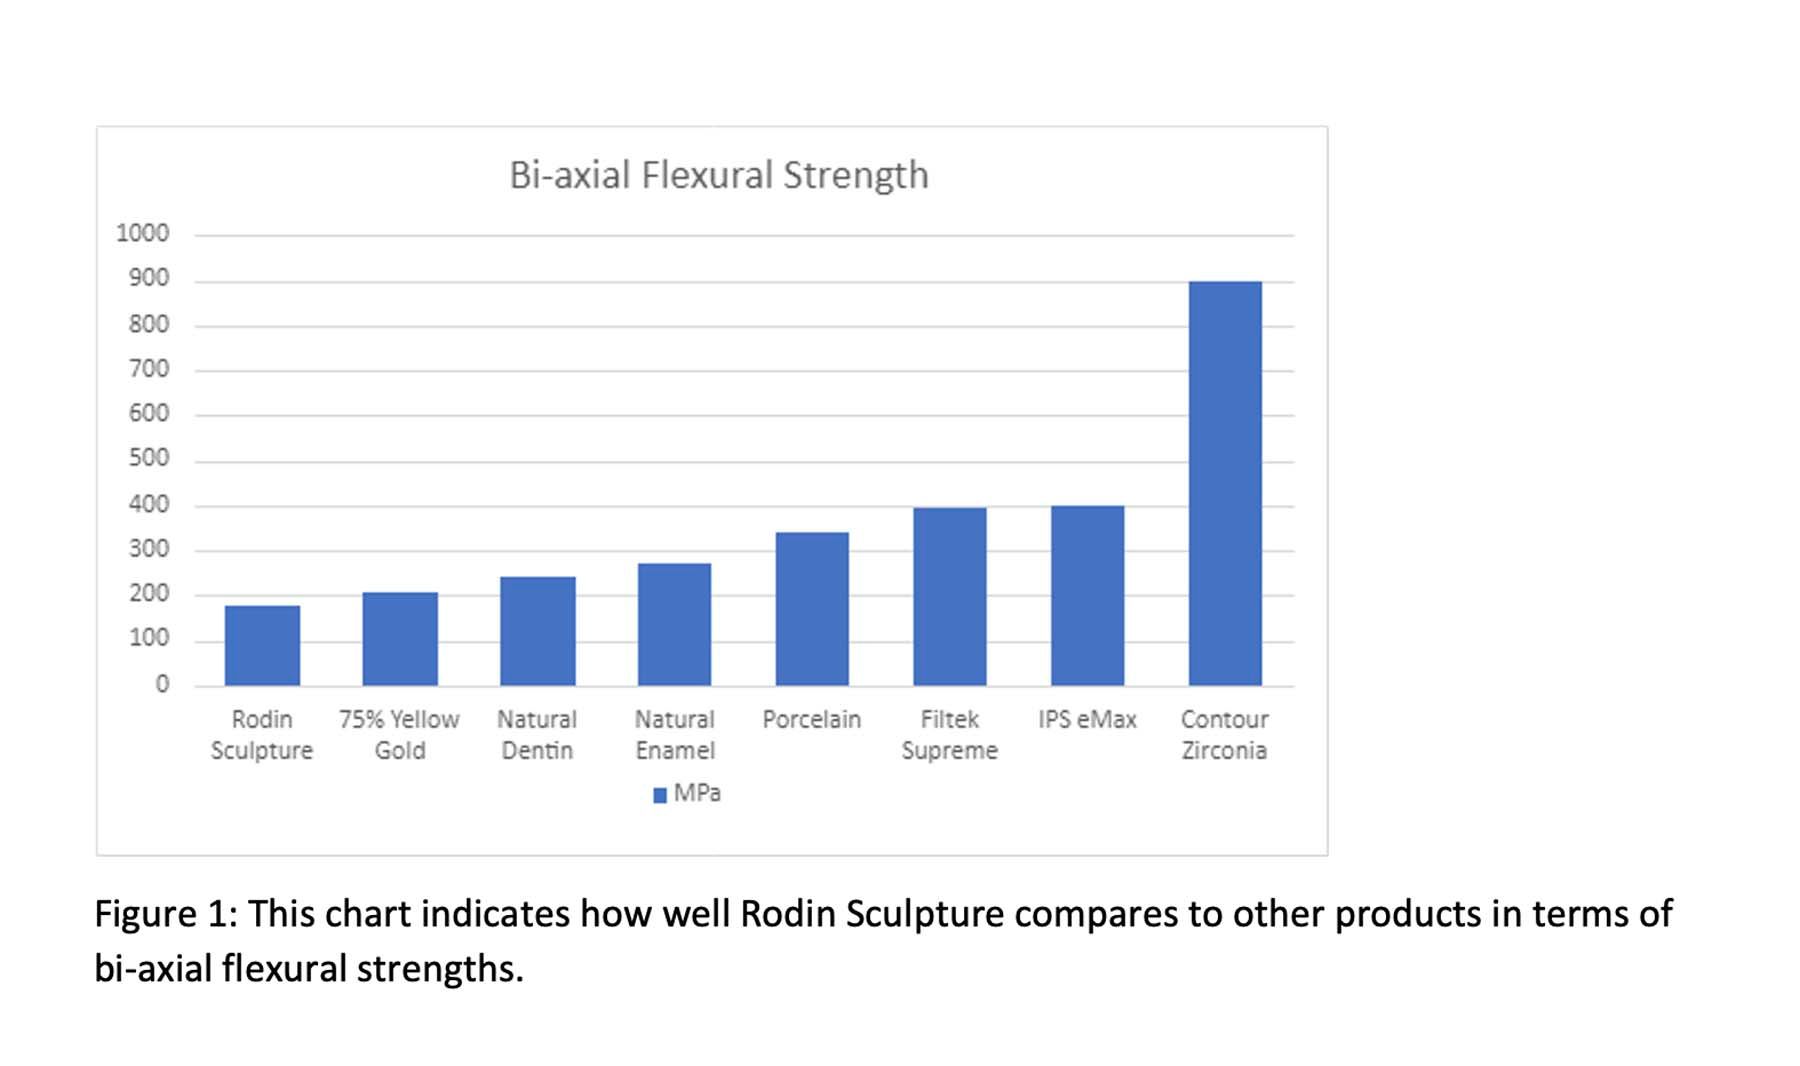 Figure 1. This chart indicates how well Rodin Sculpture compares to other products in terms of bi-axial flexural strengths.